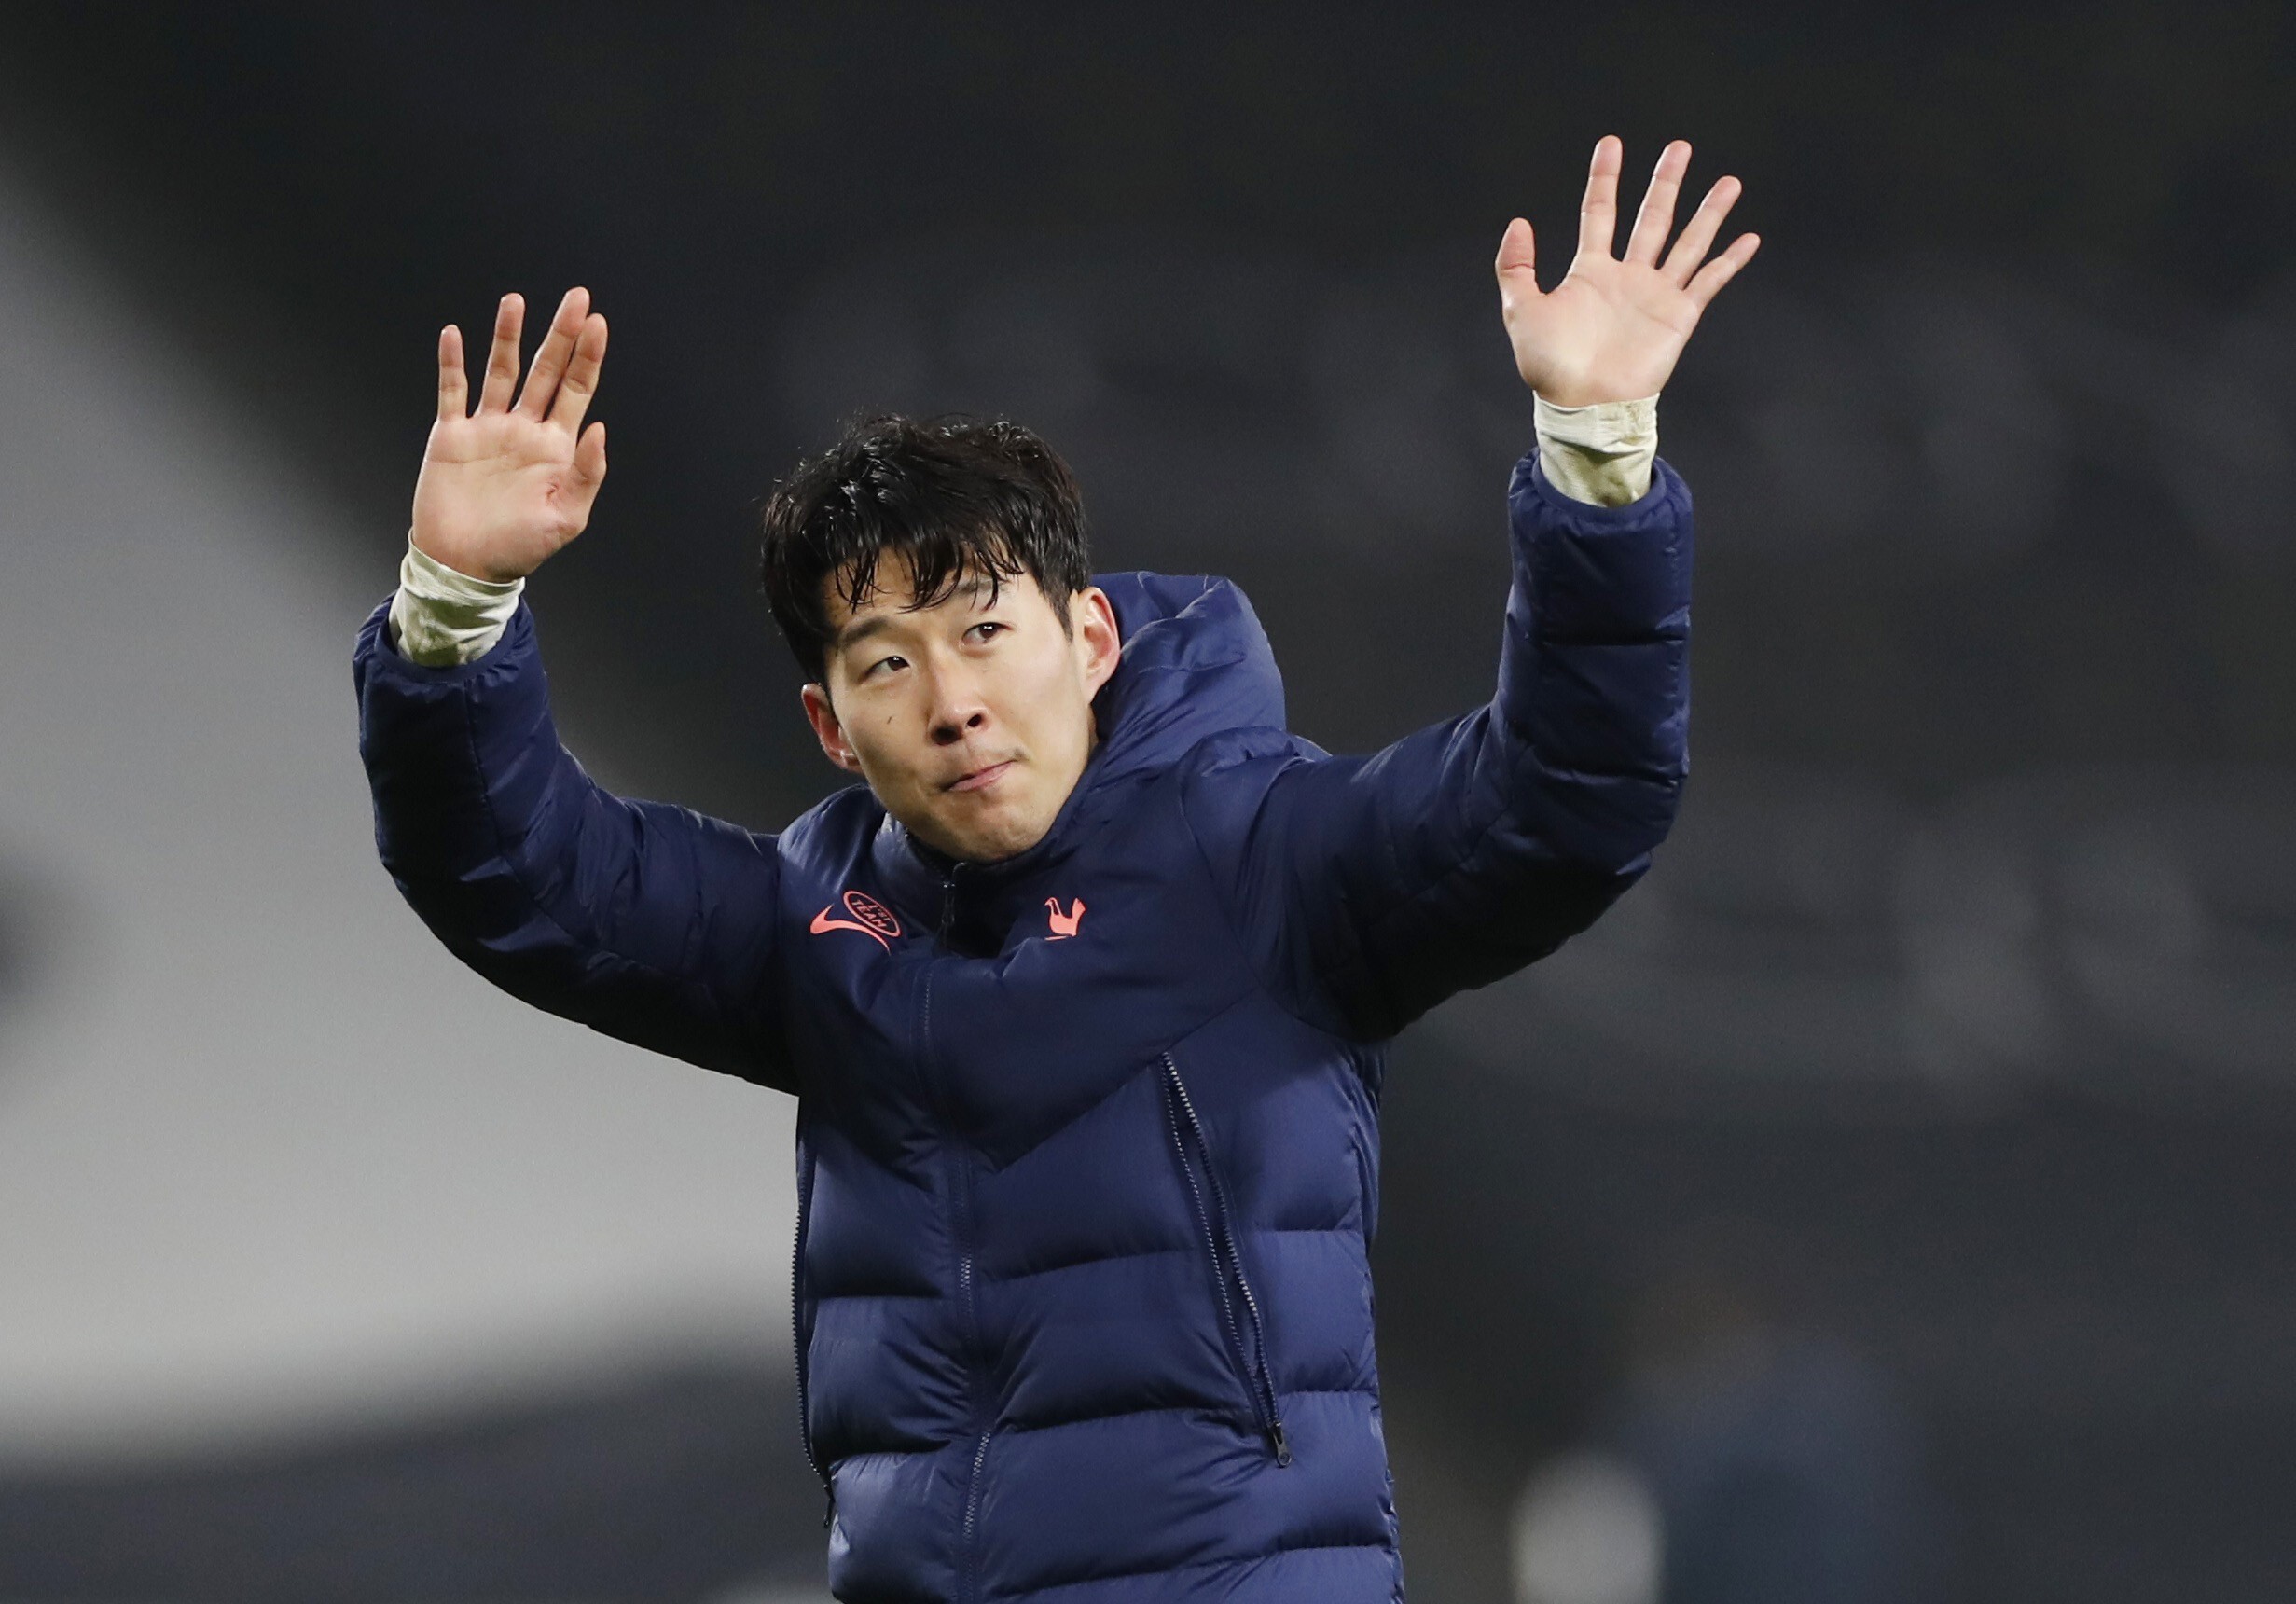 WATCH: Heung-min Son's solo goal is pure magnificence - NBC Sports